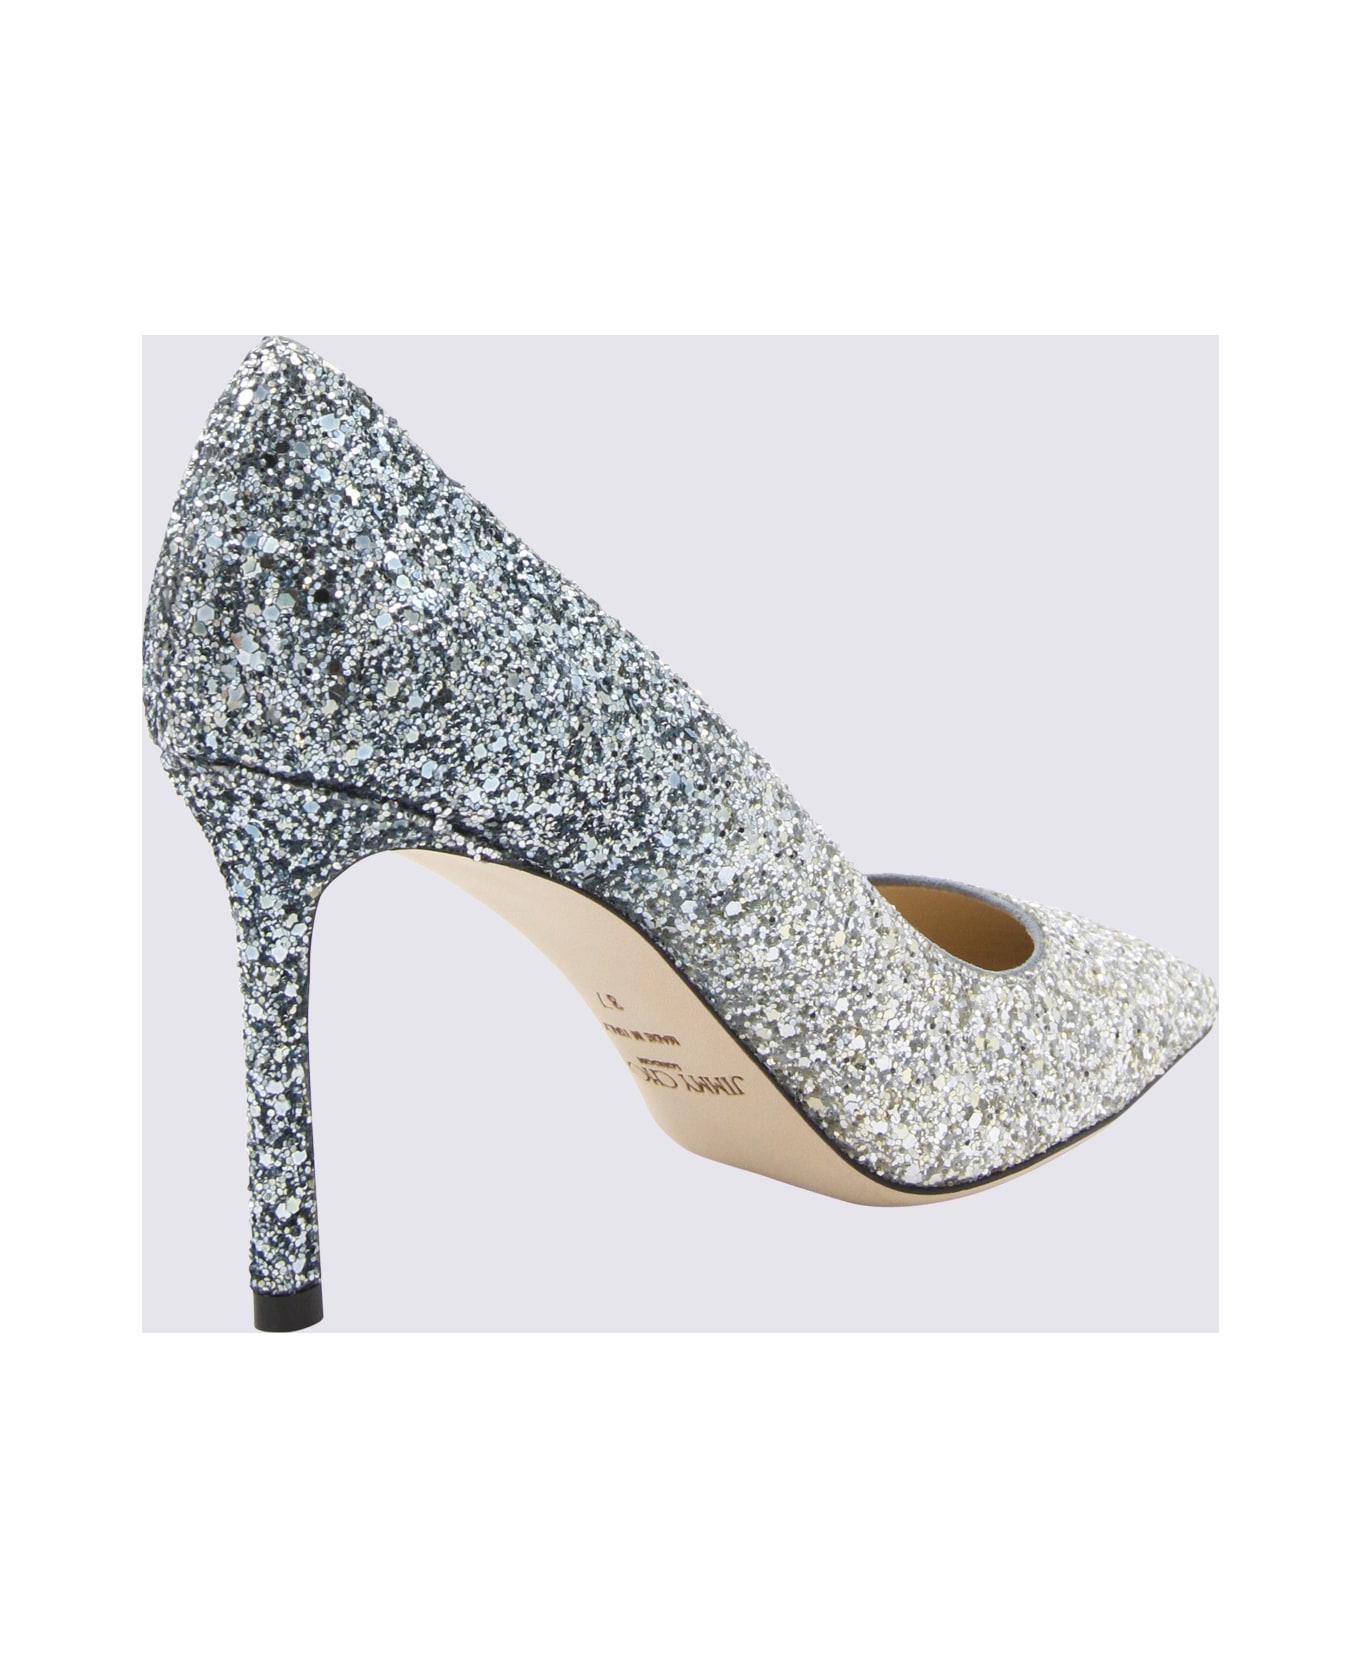 Jimmy Choo Silver And Dusk Blue Leather Romy Pumps - SILVER/DUSK BLUE ハイヒール